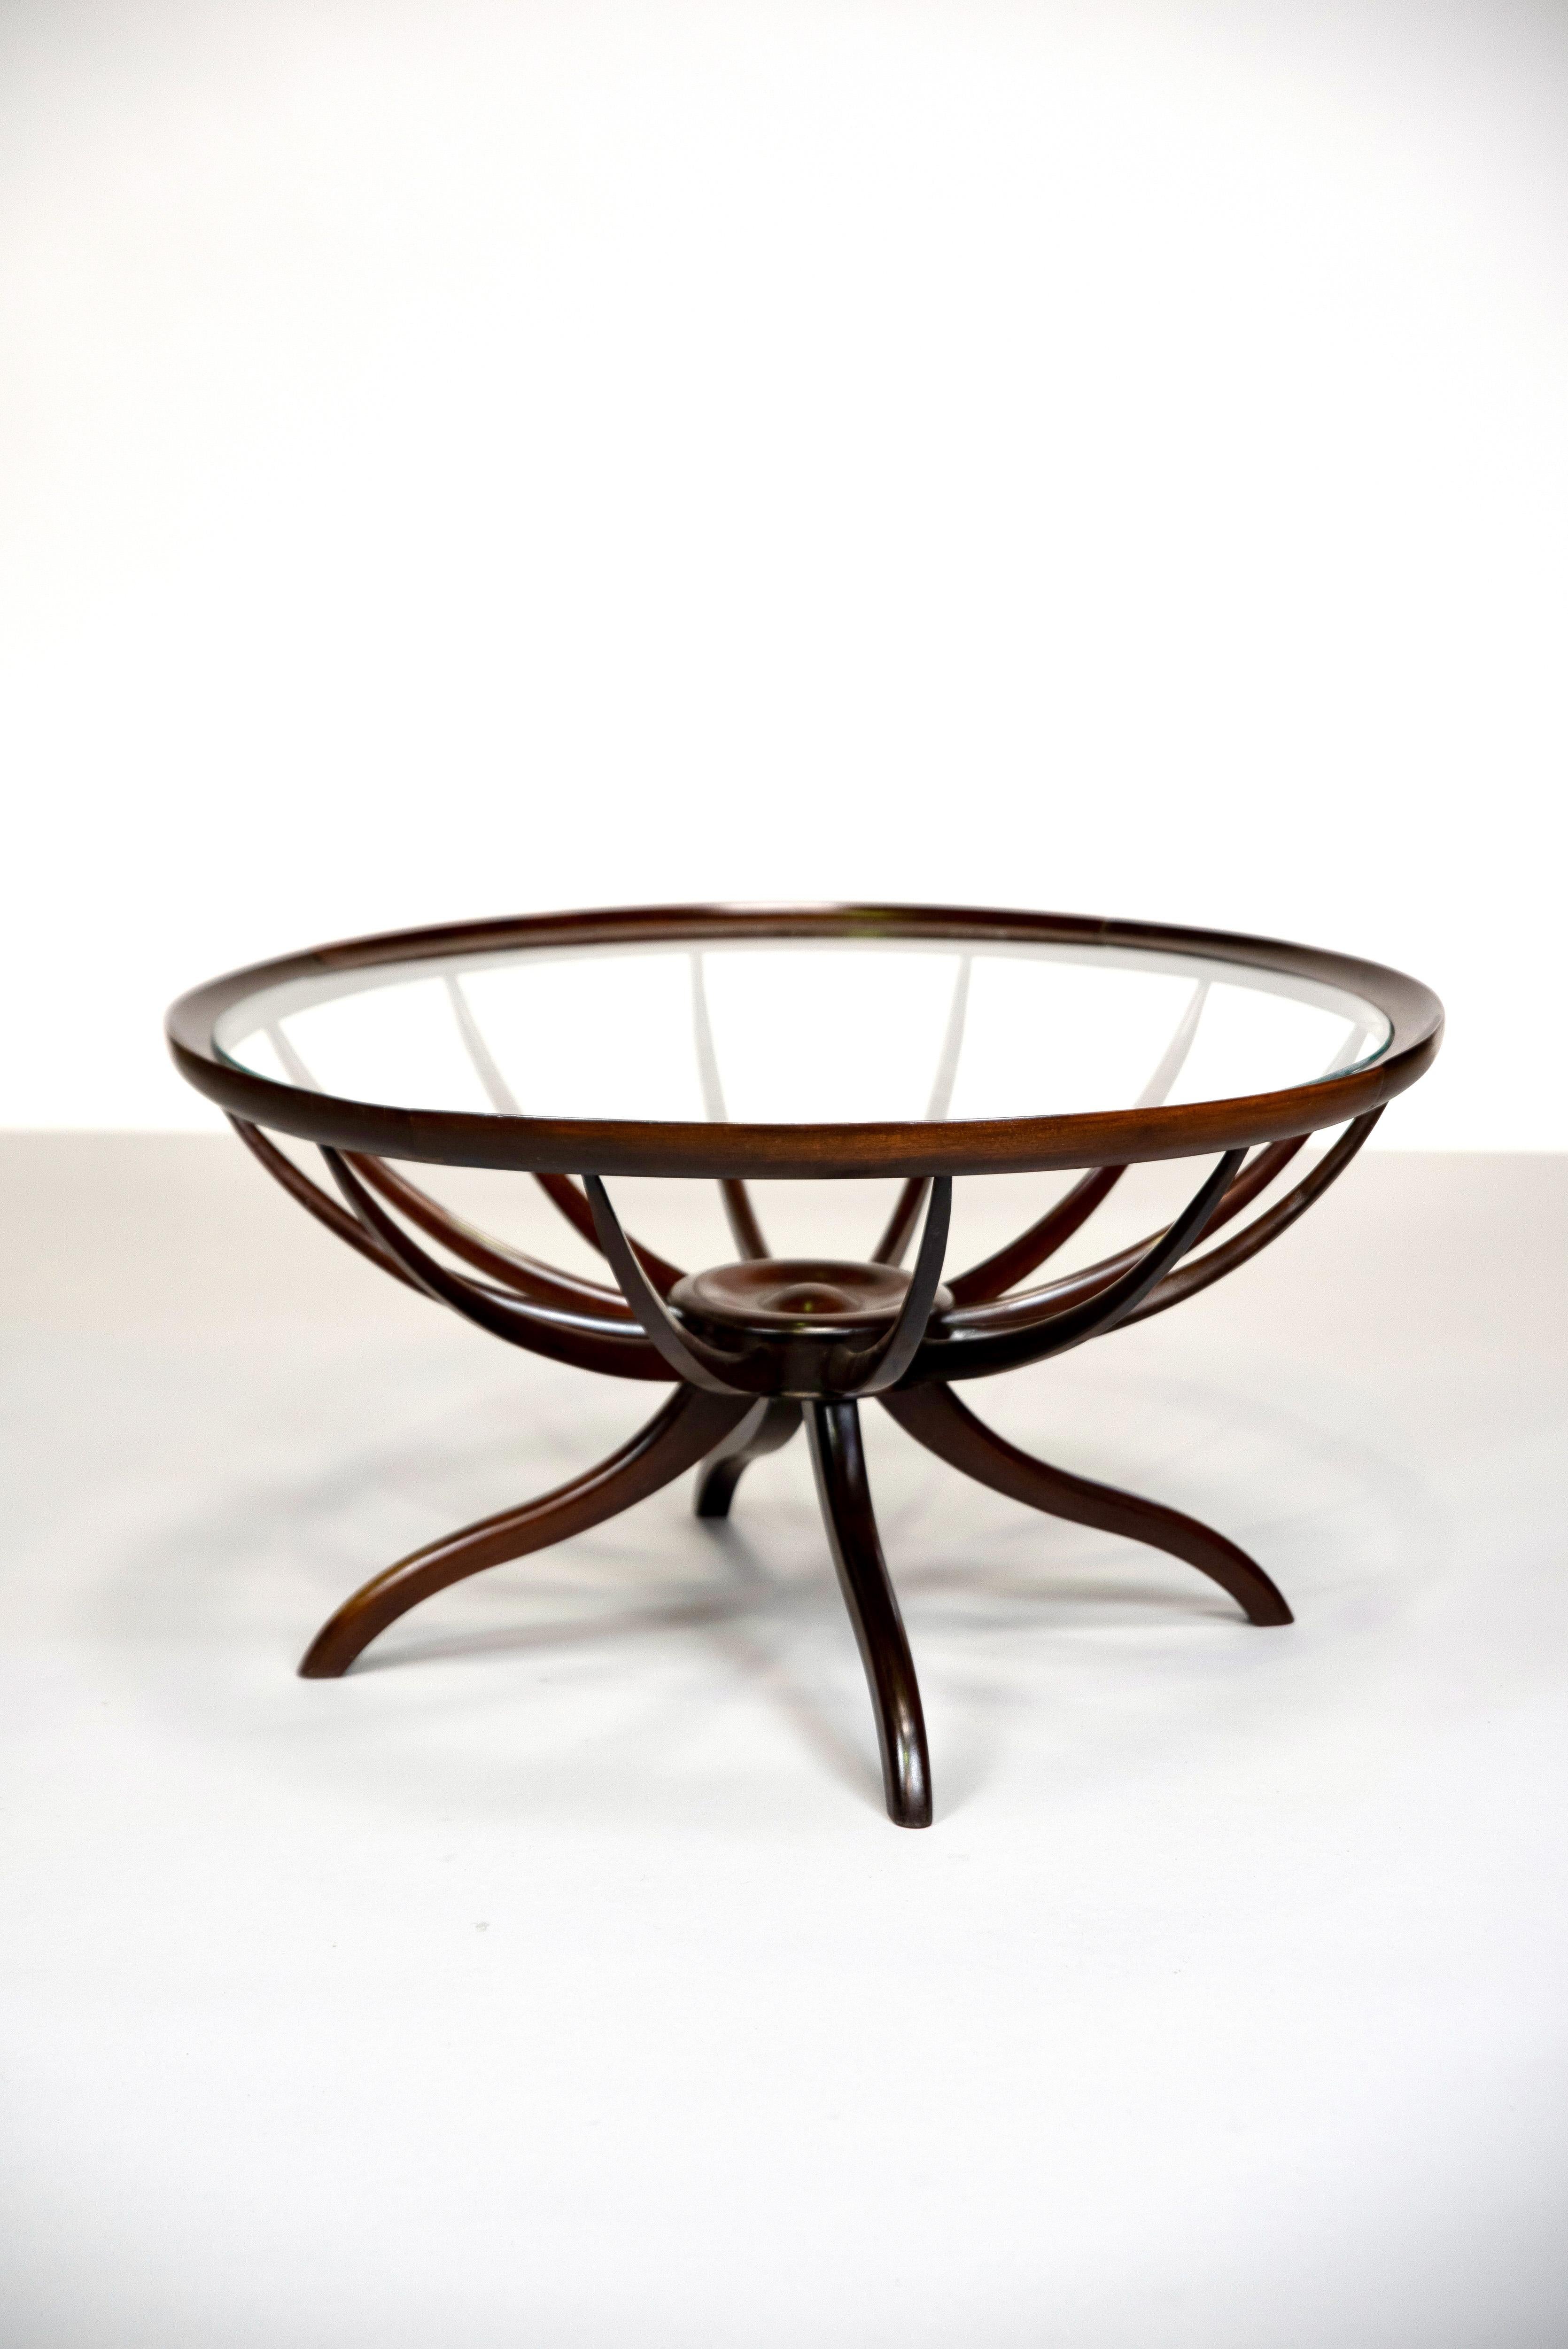 Giuseppe Scapinelli's Aranha table is an emblematic piece of Brazilian design. This dark-colored solid wood table was designed in the 1960s and became an icon of Brazilian modernism.

The Aranha table, which means 